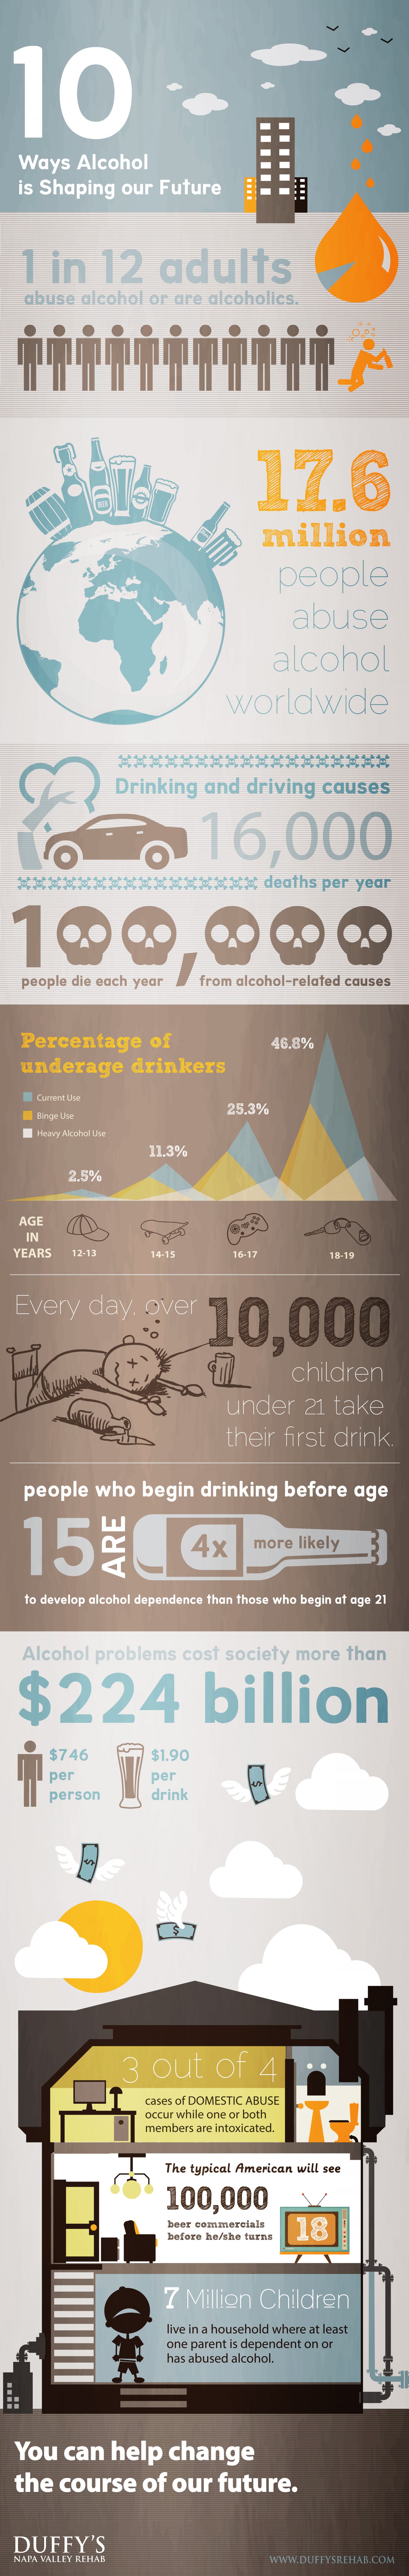 10 ways alcohol is shaping our future